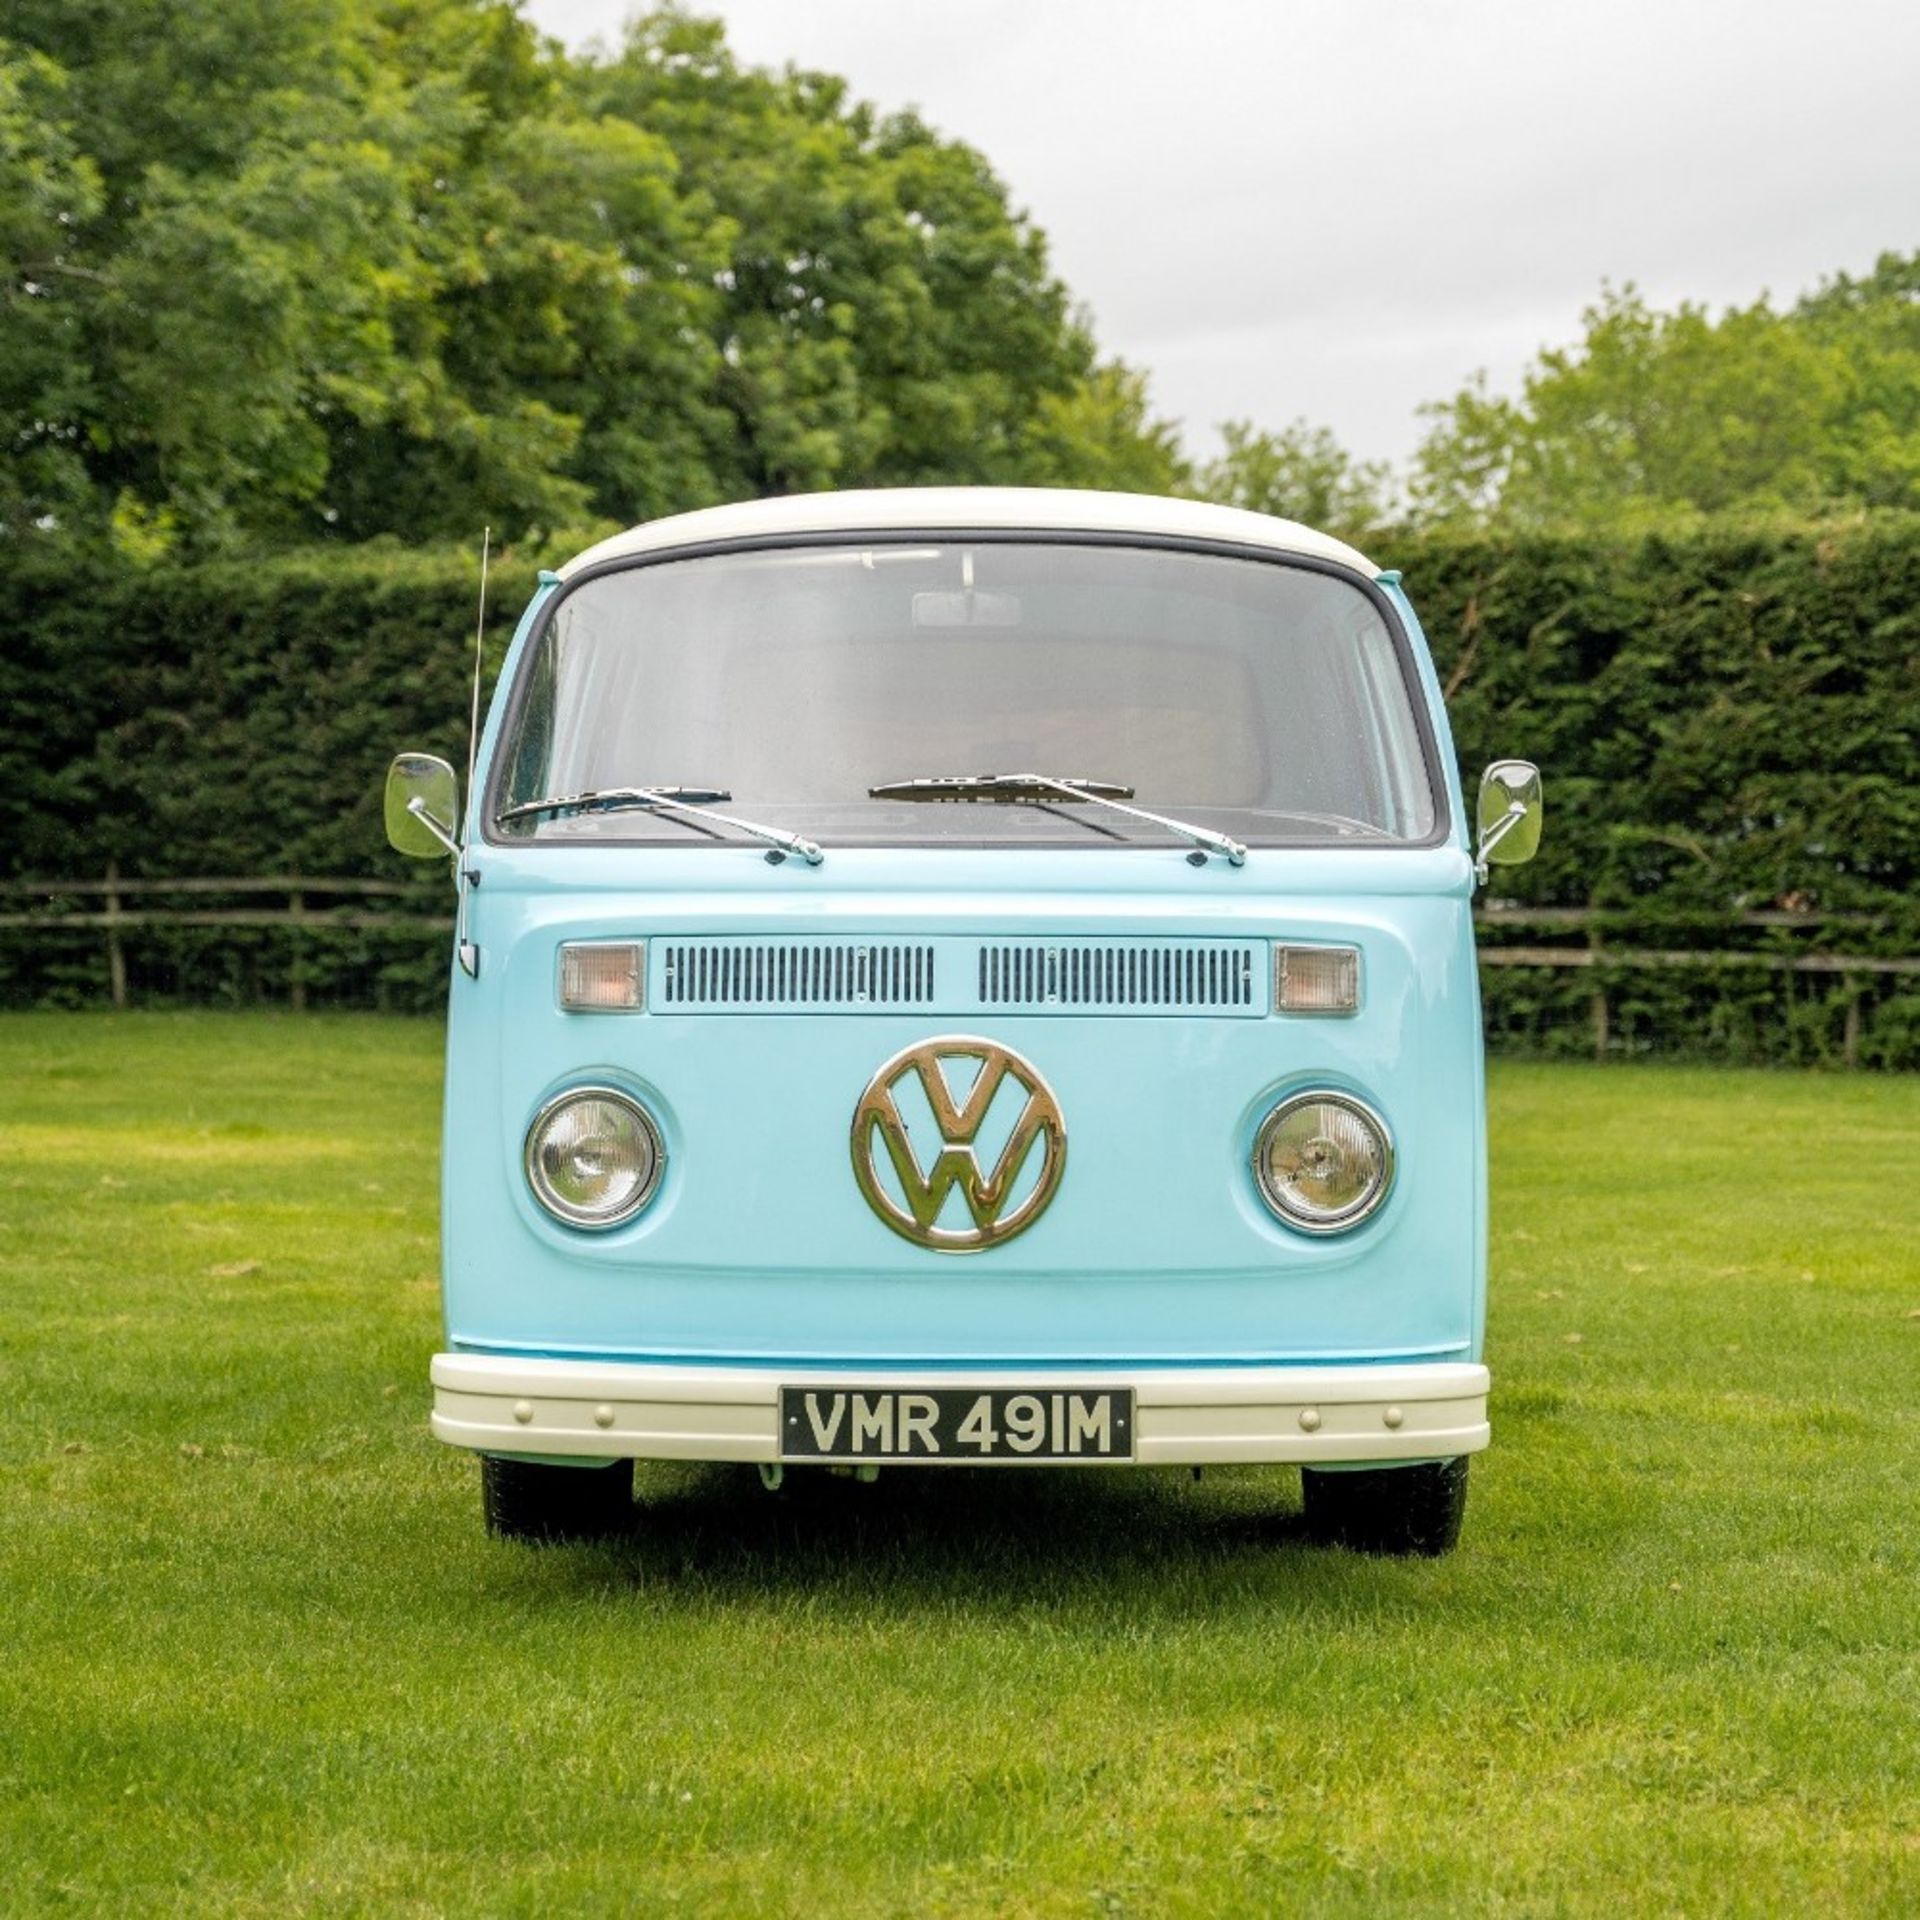 1974 VOLKSWAGEN TYPE 2 DOUBLE-CAB PICKUP Registration Number: VMR 491M Chassis Number: 2642-126- - Image 4 of 20